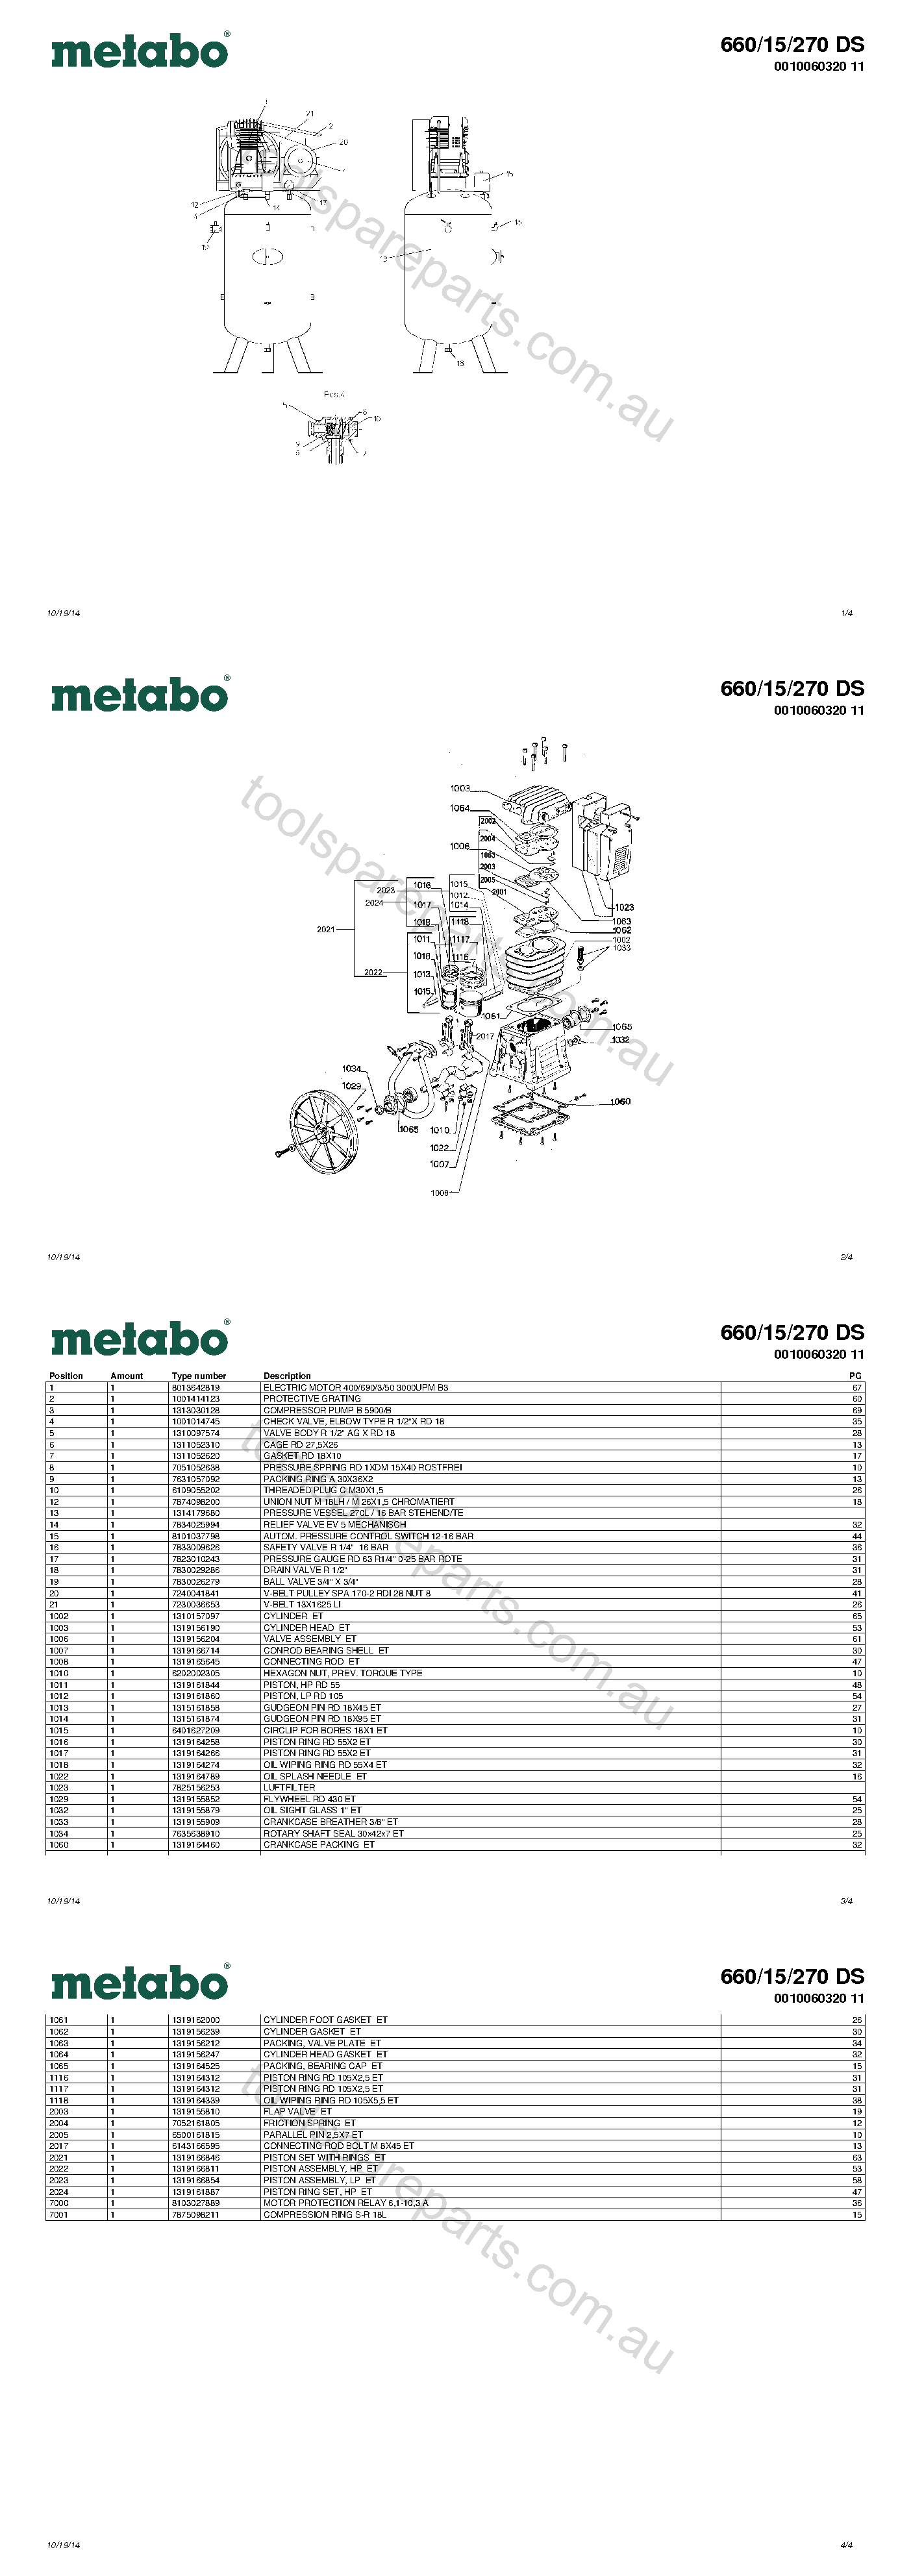 Metabo 660/15/270 DS 0010060320 11  Diagram 1